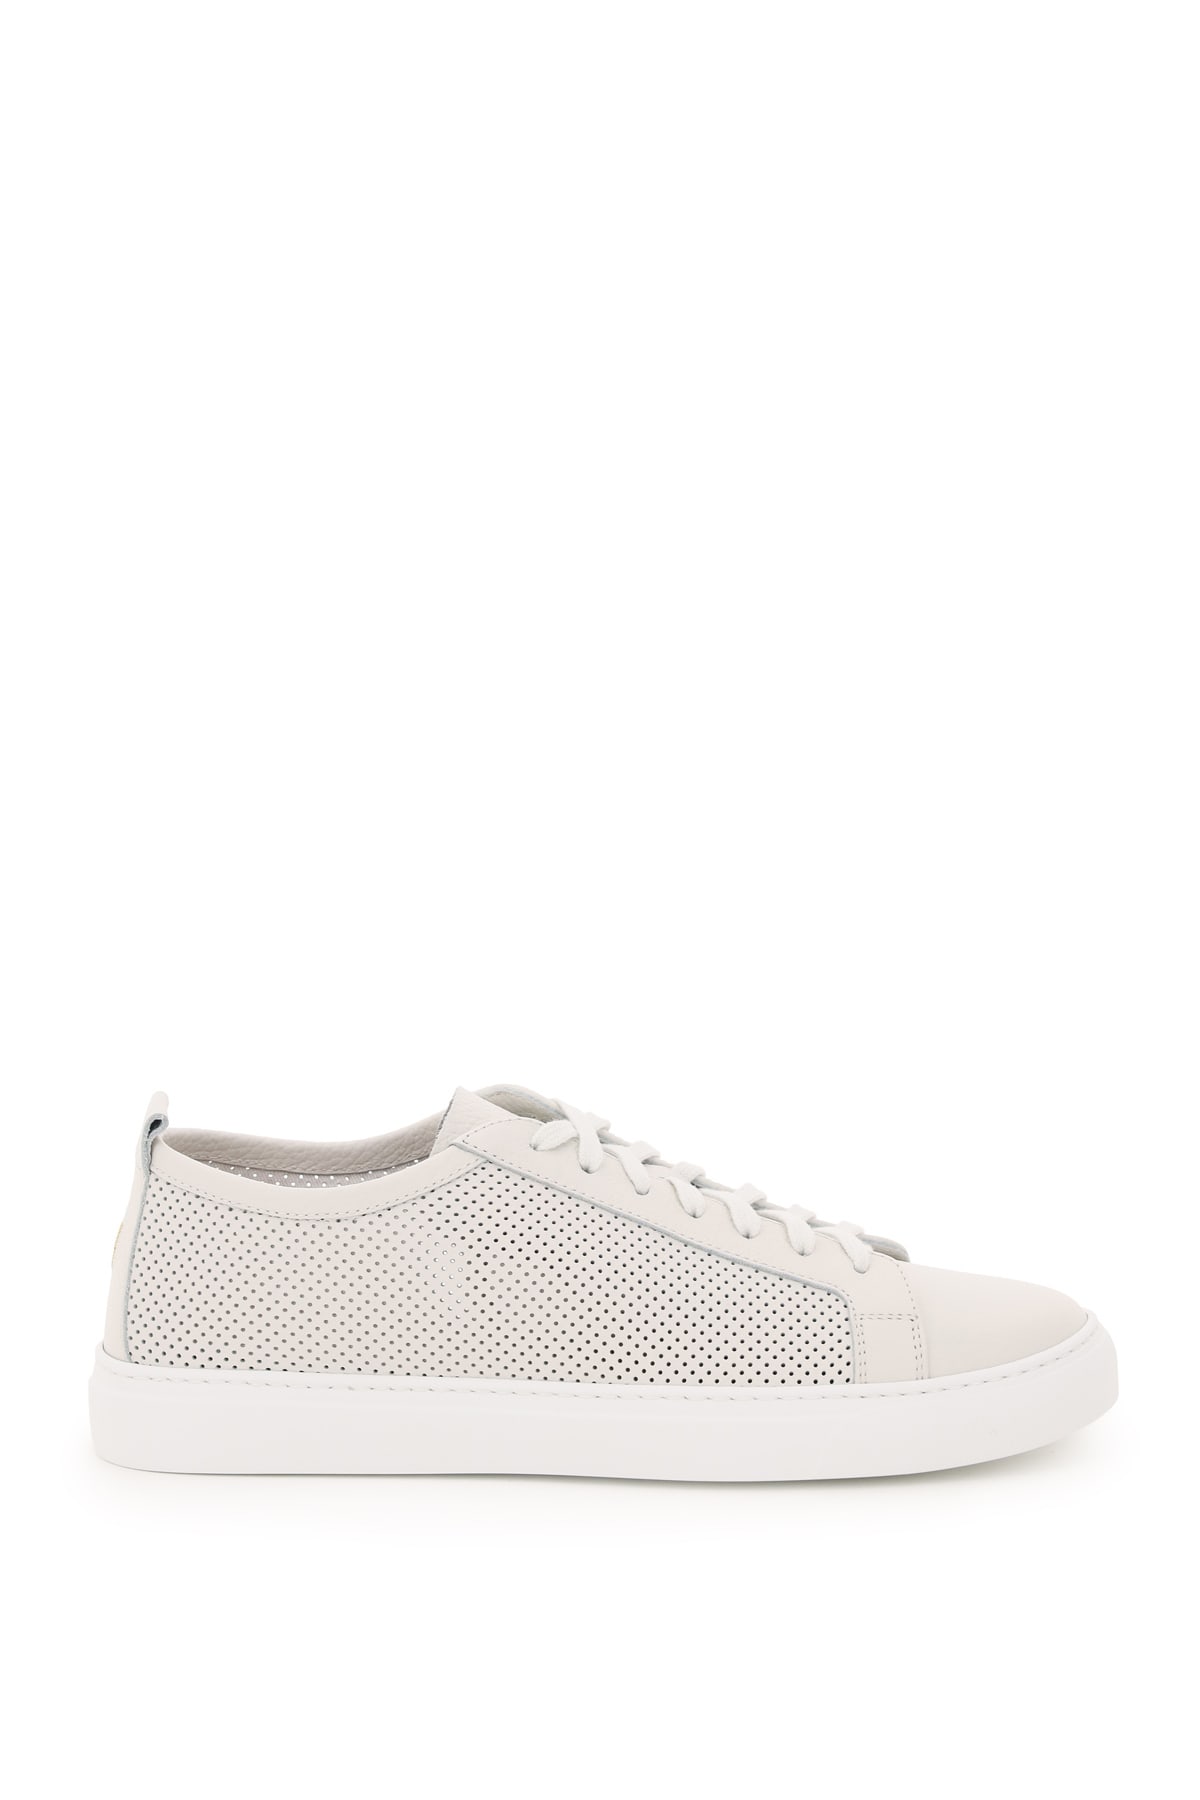 Henderson Baracco Roby Perforated Sneakers